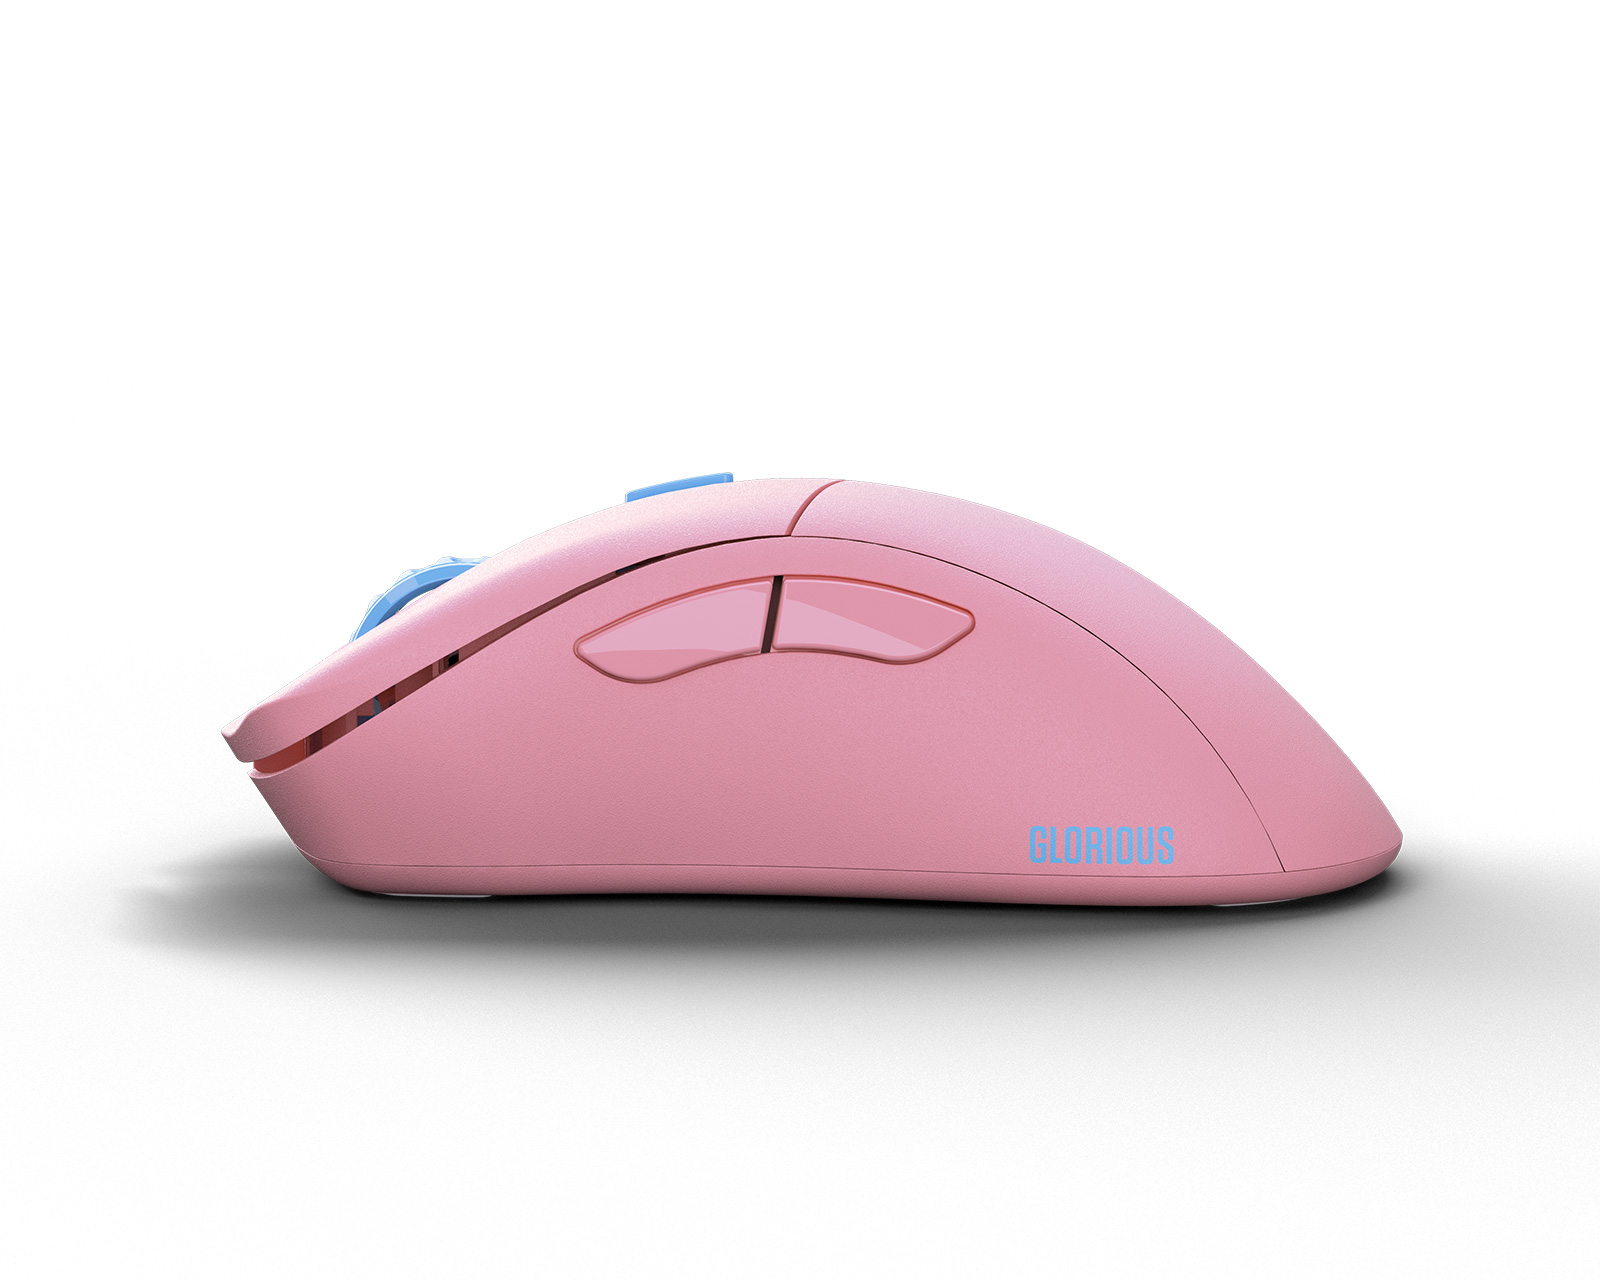 Glorious Model D PRO Wireless Gaming Mouse - Flamingo - Forge